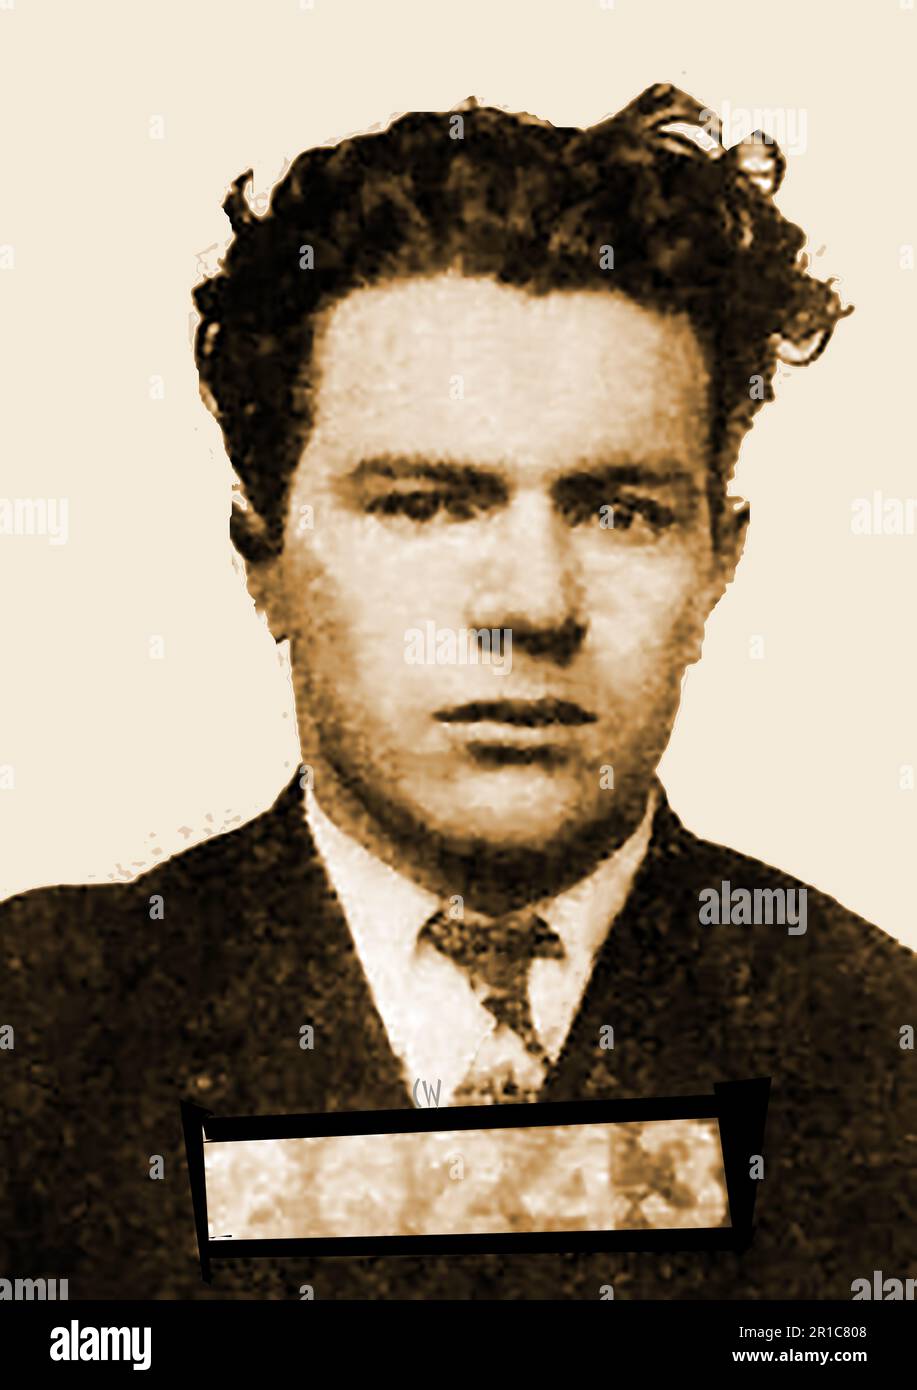 A  prison mugshot portrait of William Edward Hickman, murderer of 12 year old Marian Parker. Hung at San Quentin gallows). After abducting the child, Hickman  held her to ransom, however he had murdered the girl even before the ransom was paid. Stock Photo